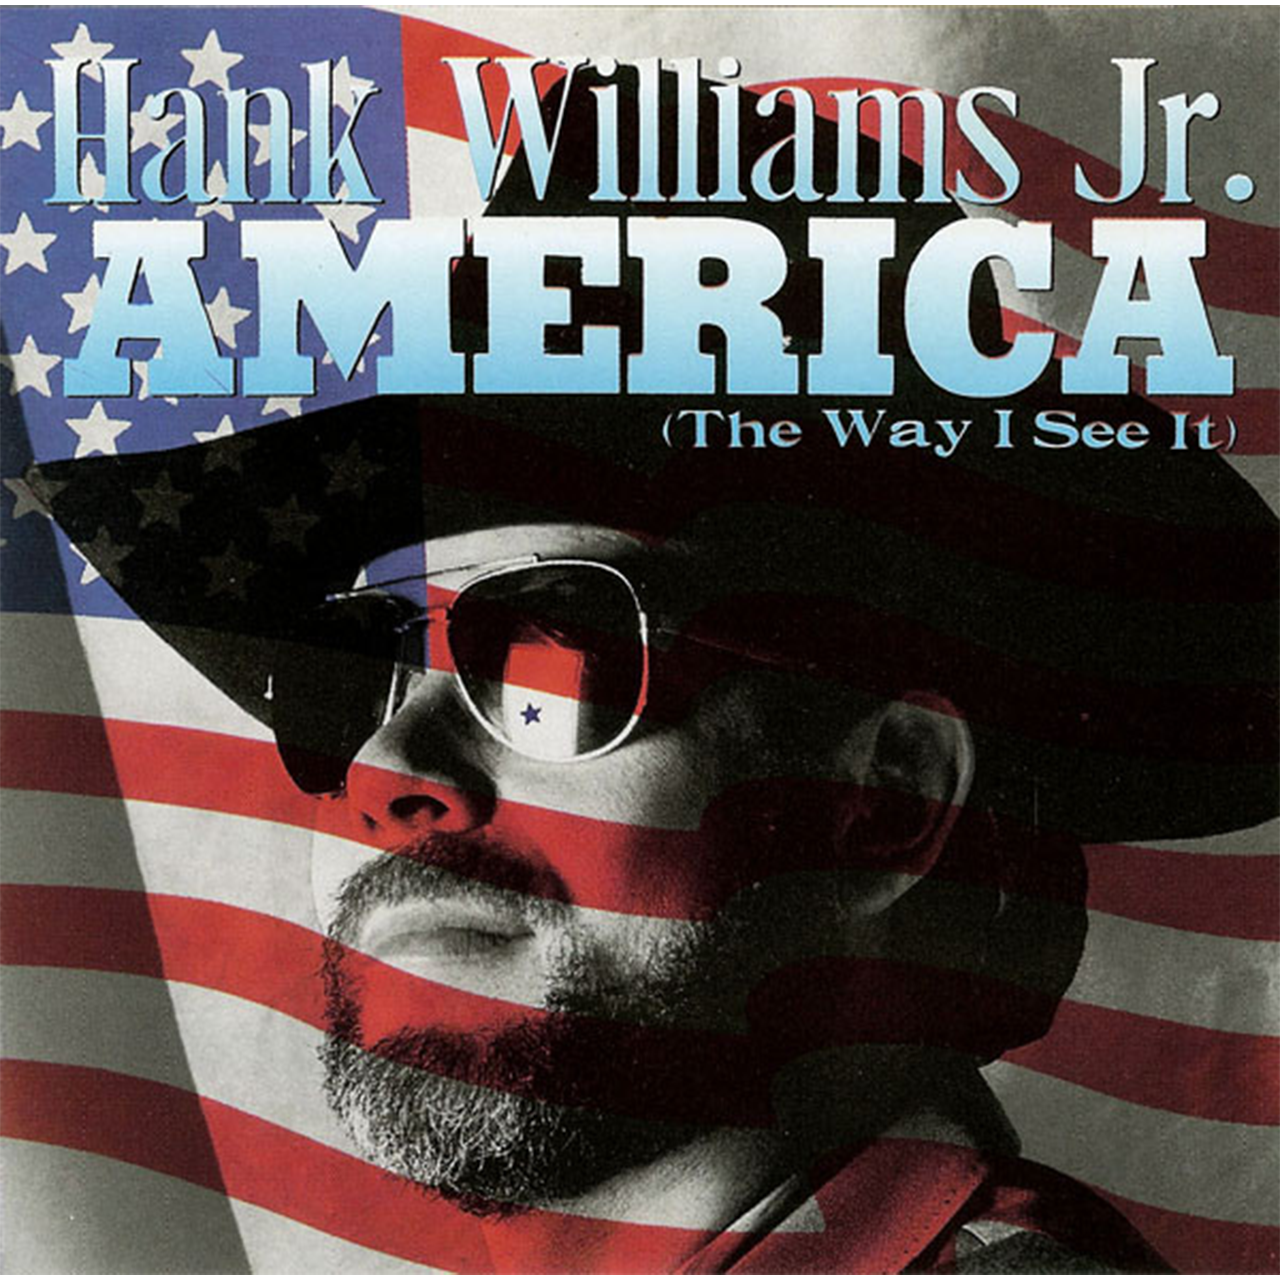 America (The Way I See It) CD